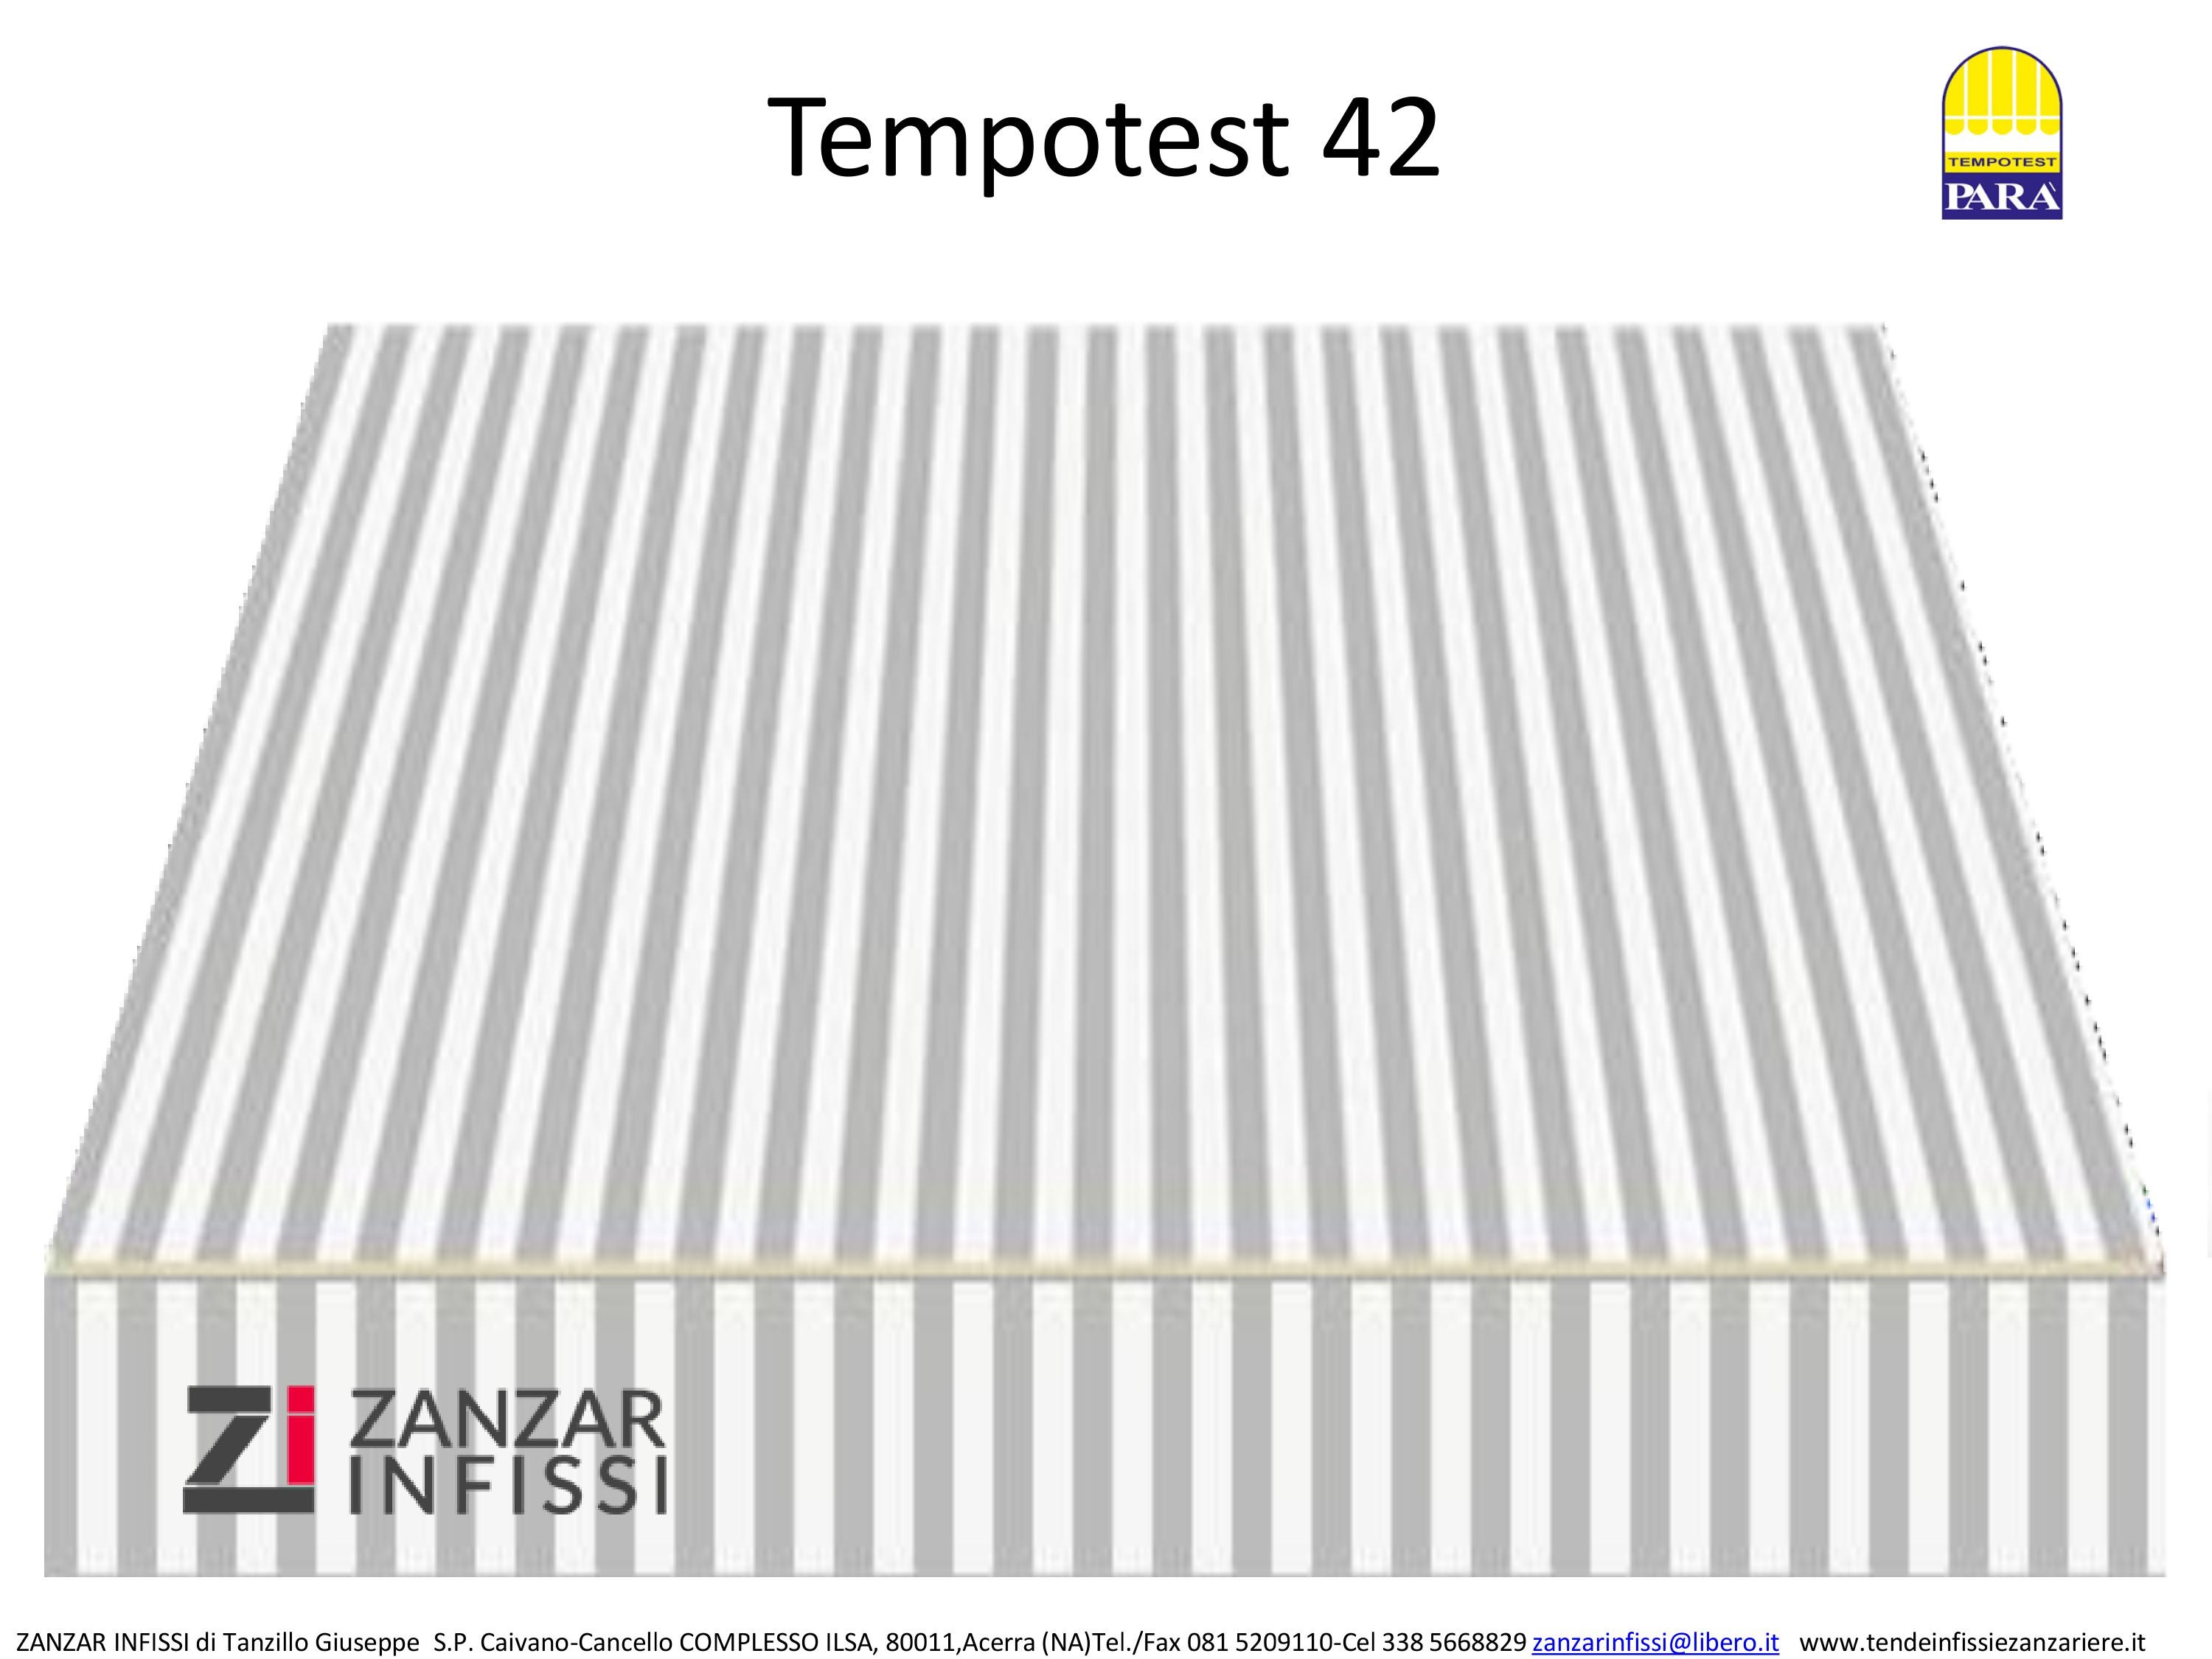 Tempotest 42